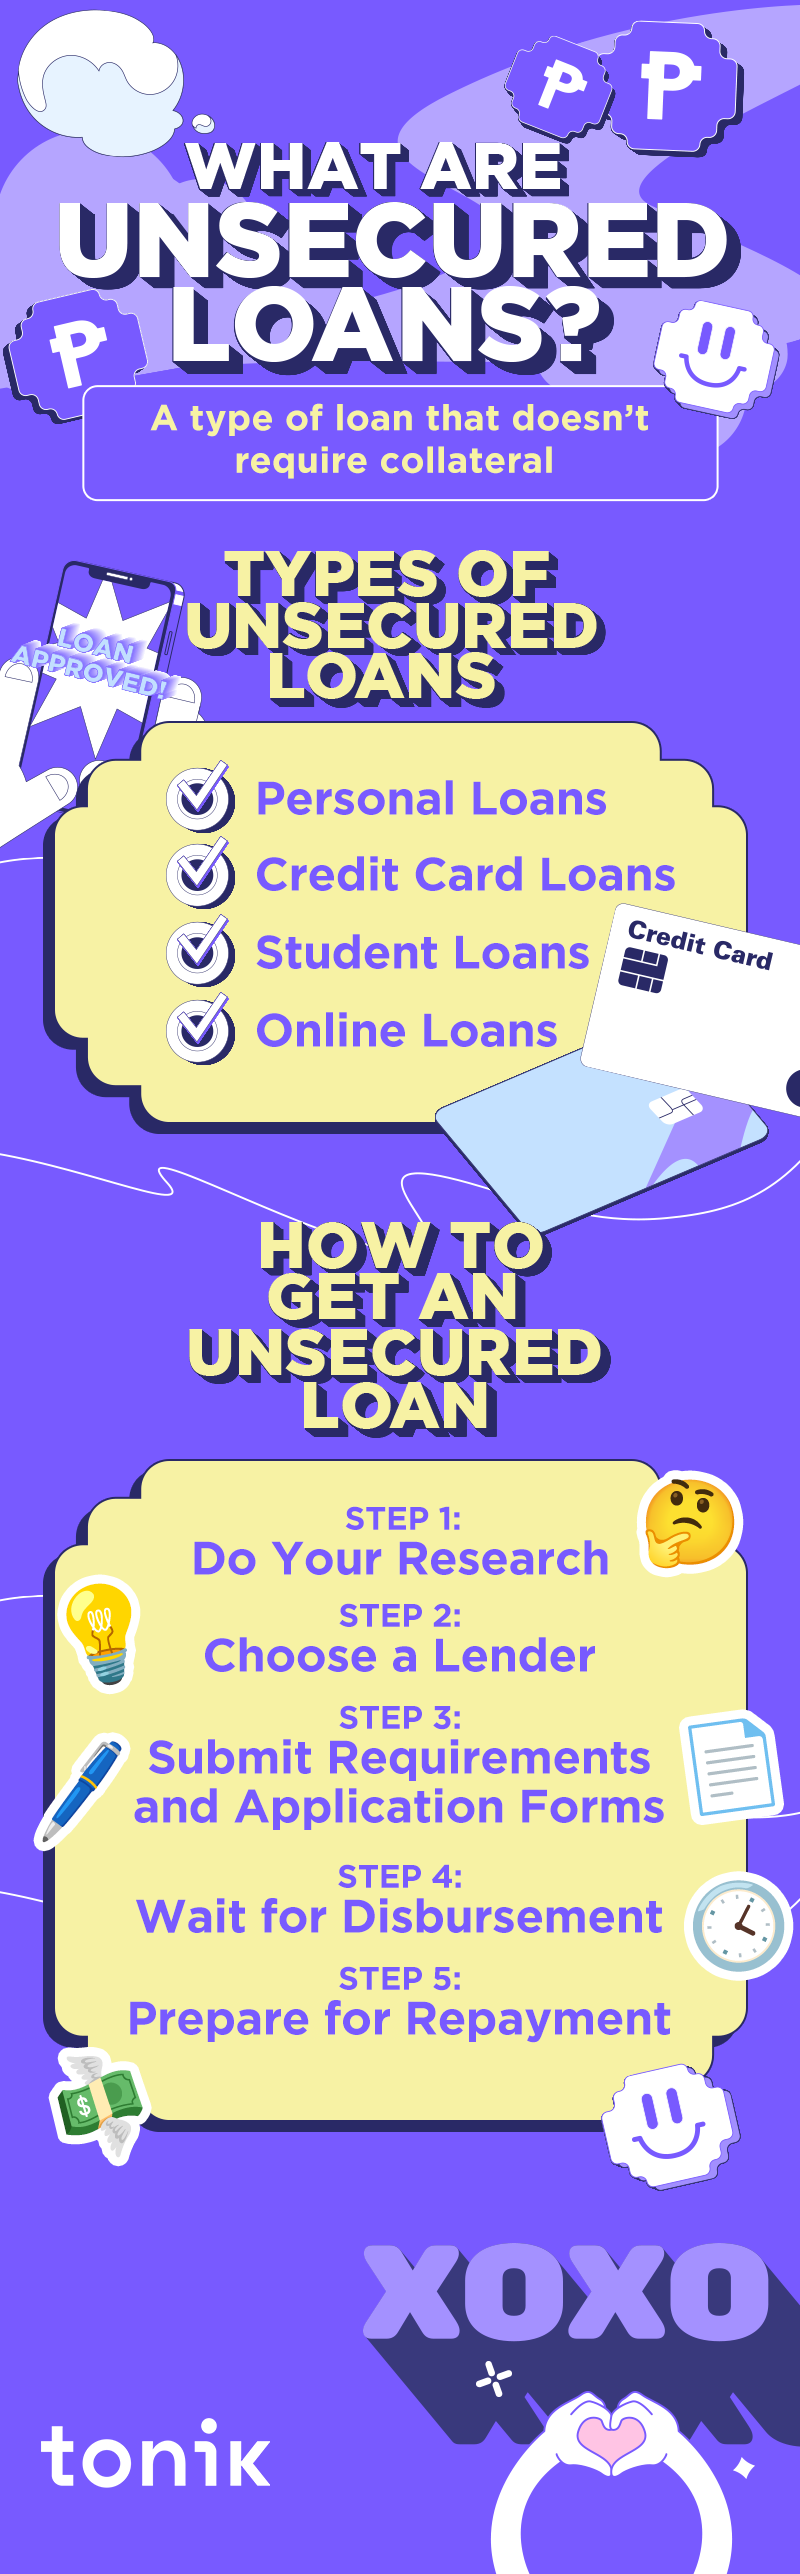 Infographic about getting an unsecured loan in the Philippines